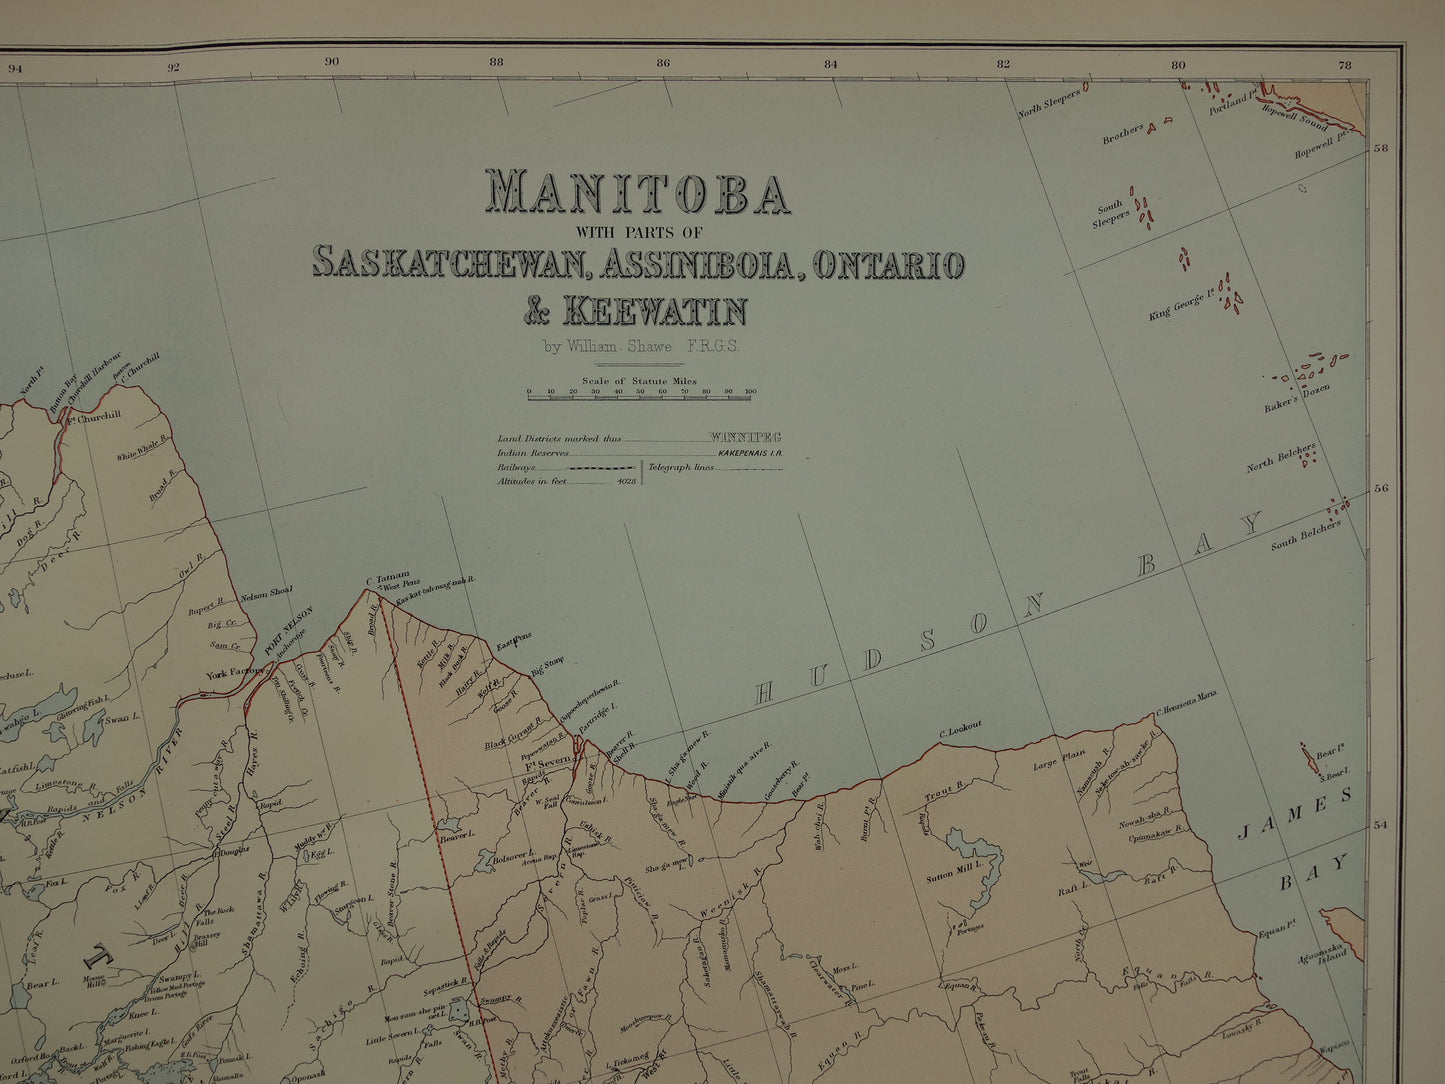 60 Canada section III - Manitoba with parts of Saskatchewan, Assiniboia, Ontario & Keewatin by William Shawe old map